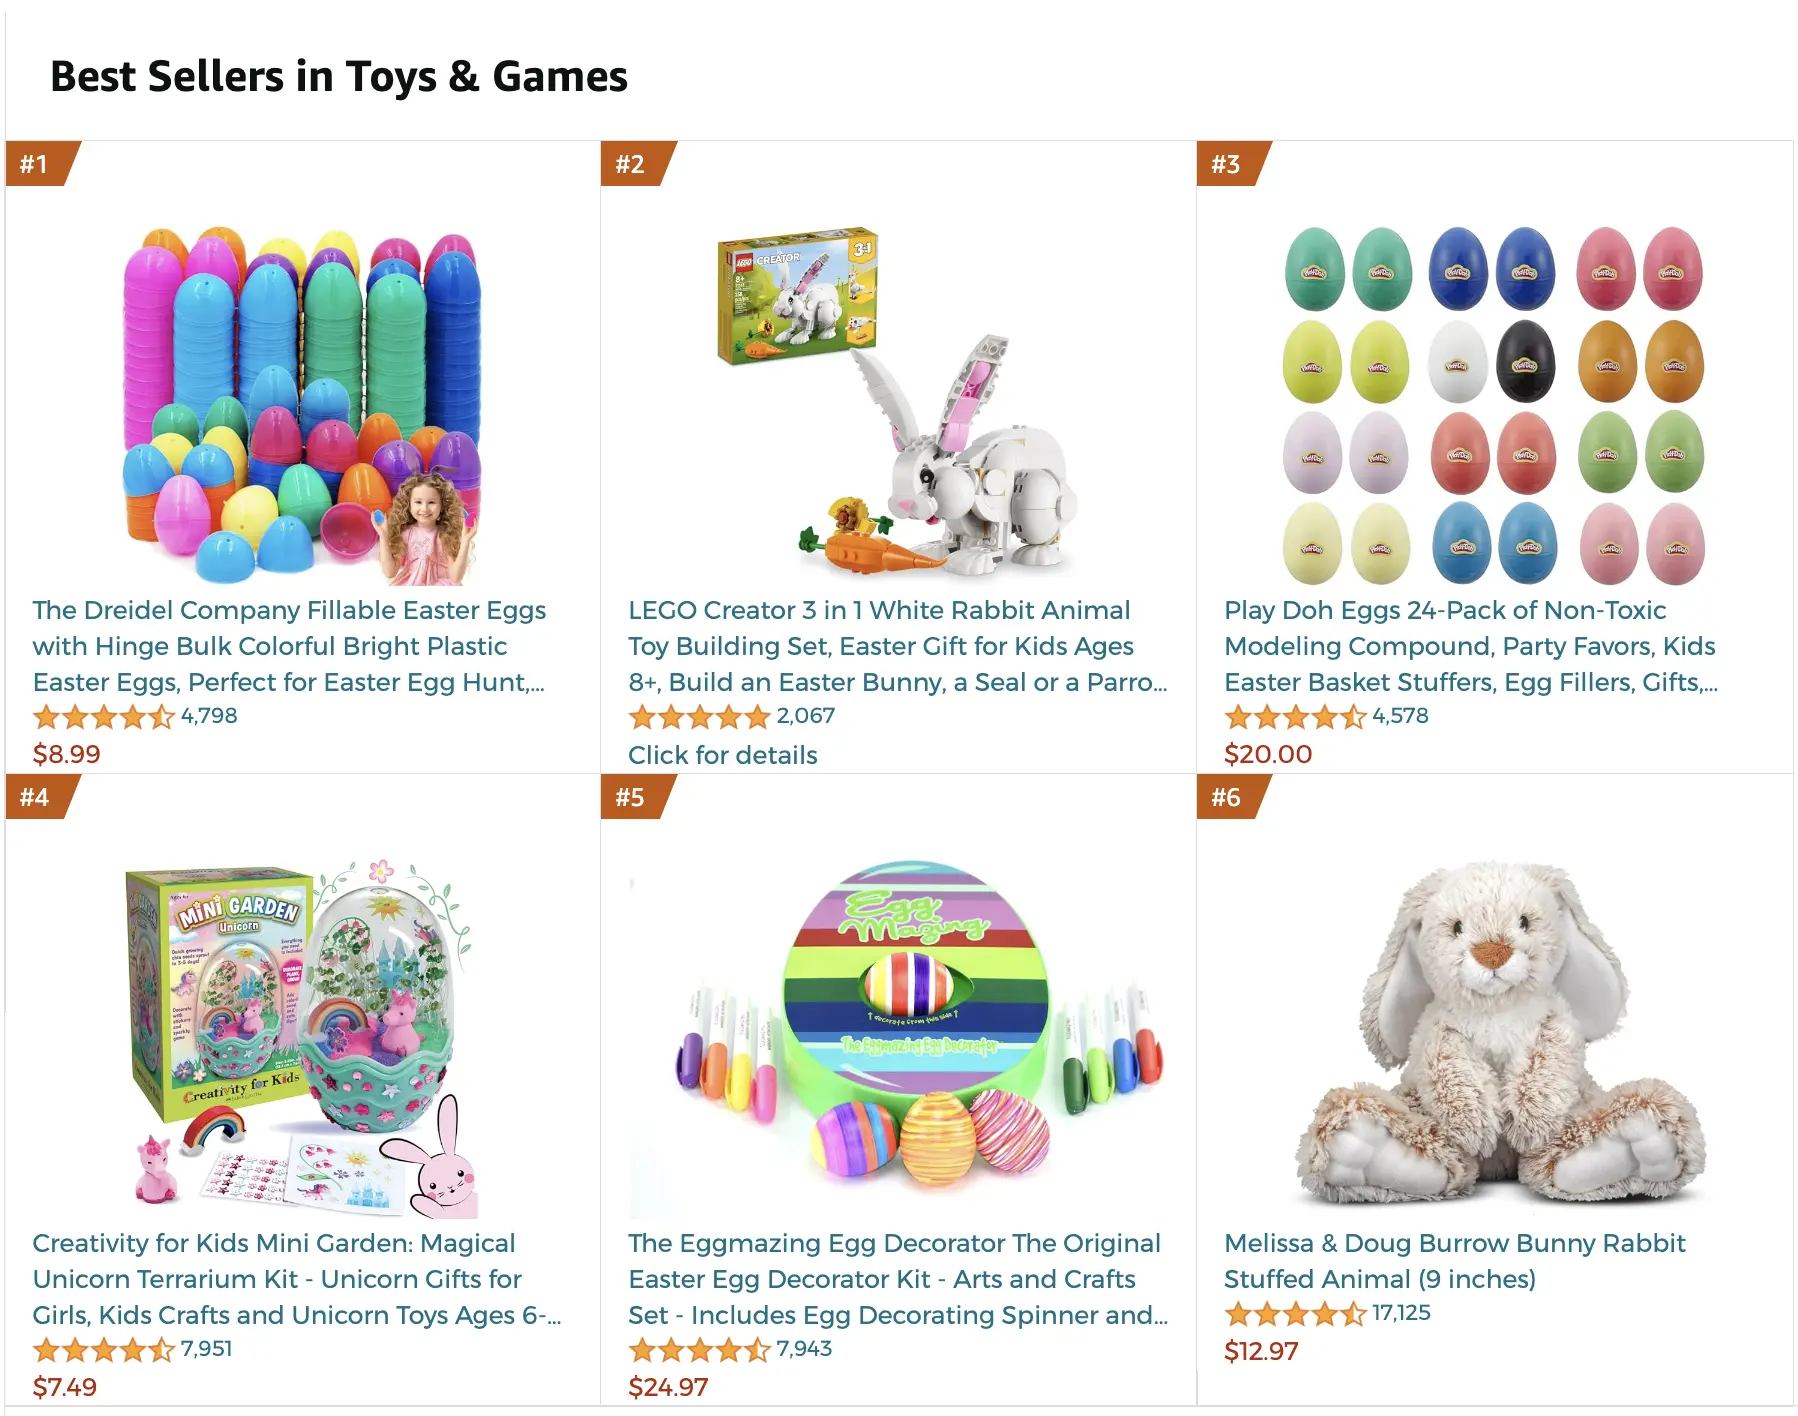 Amazon's best selling in Toys and Games category.